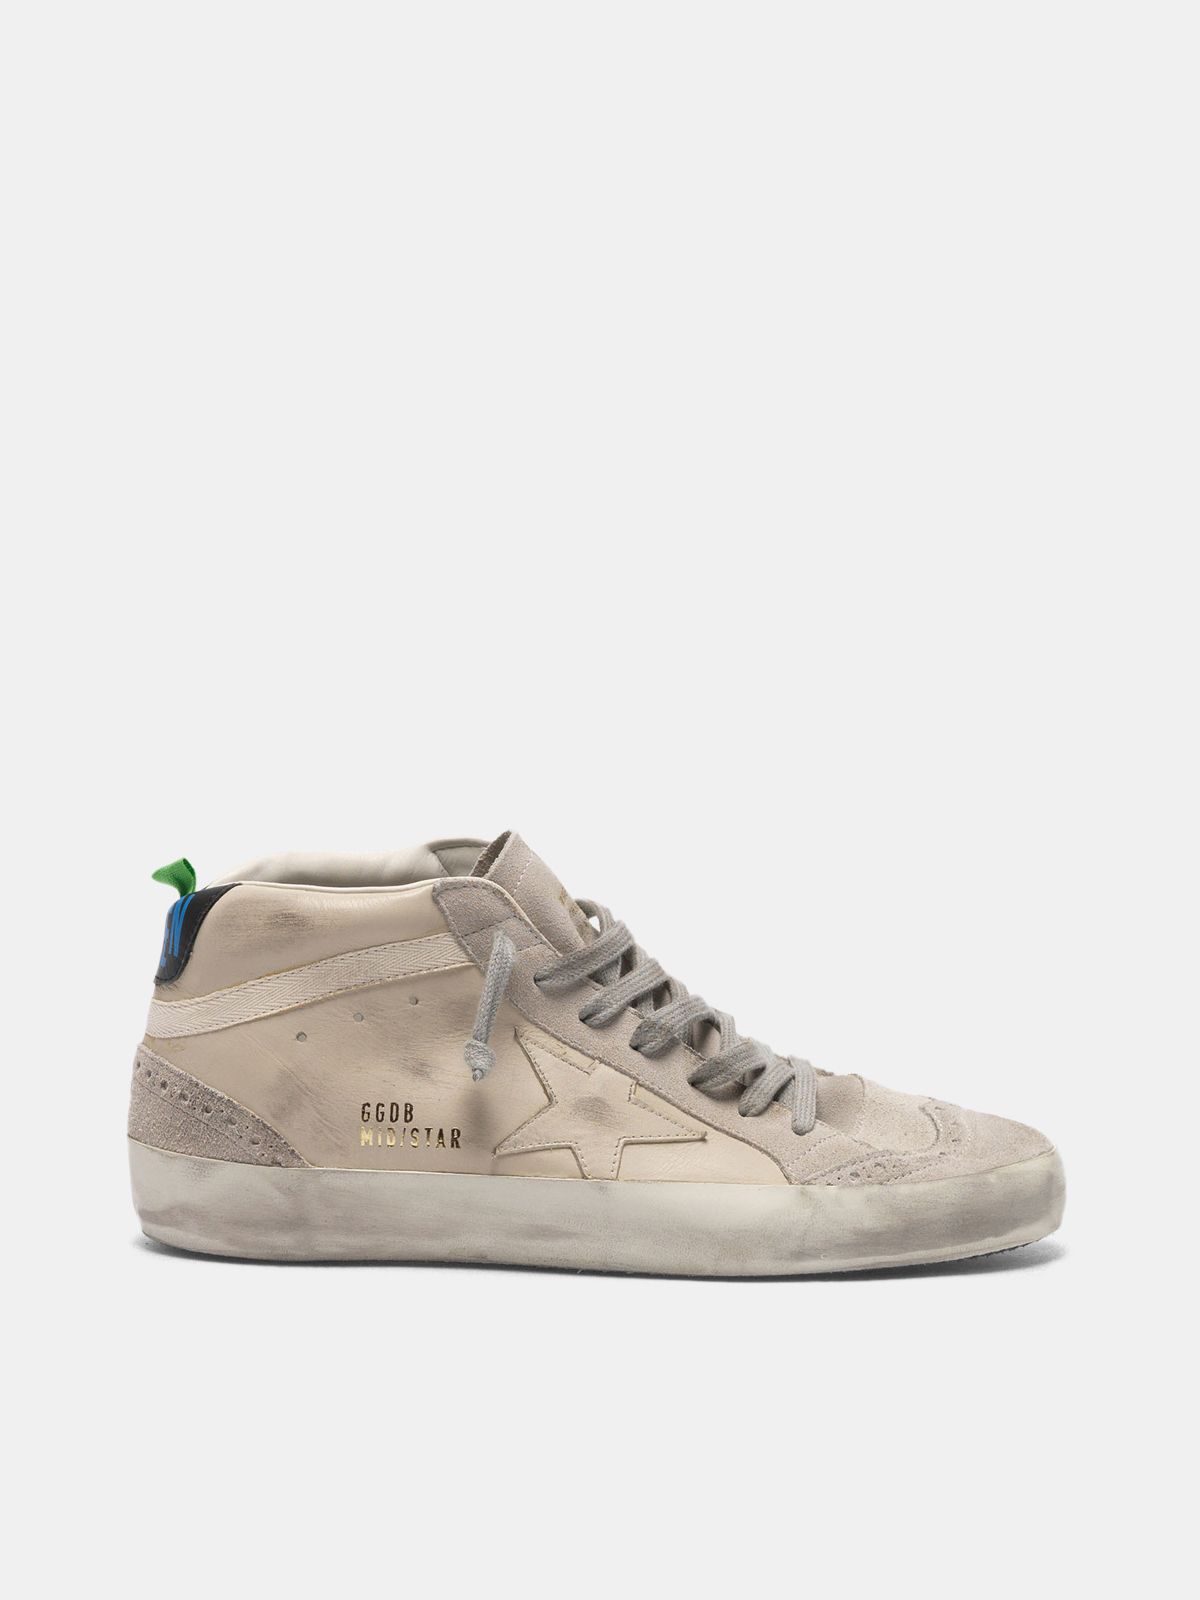 Mid Star sneakers in smooth leather and suede